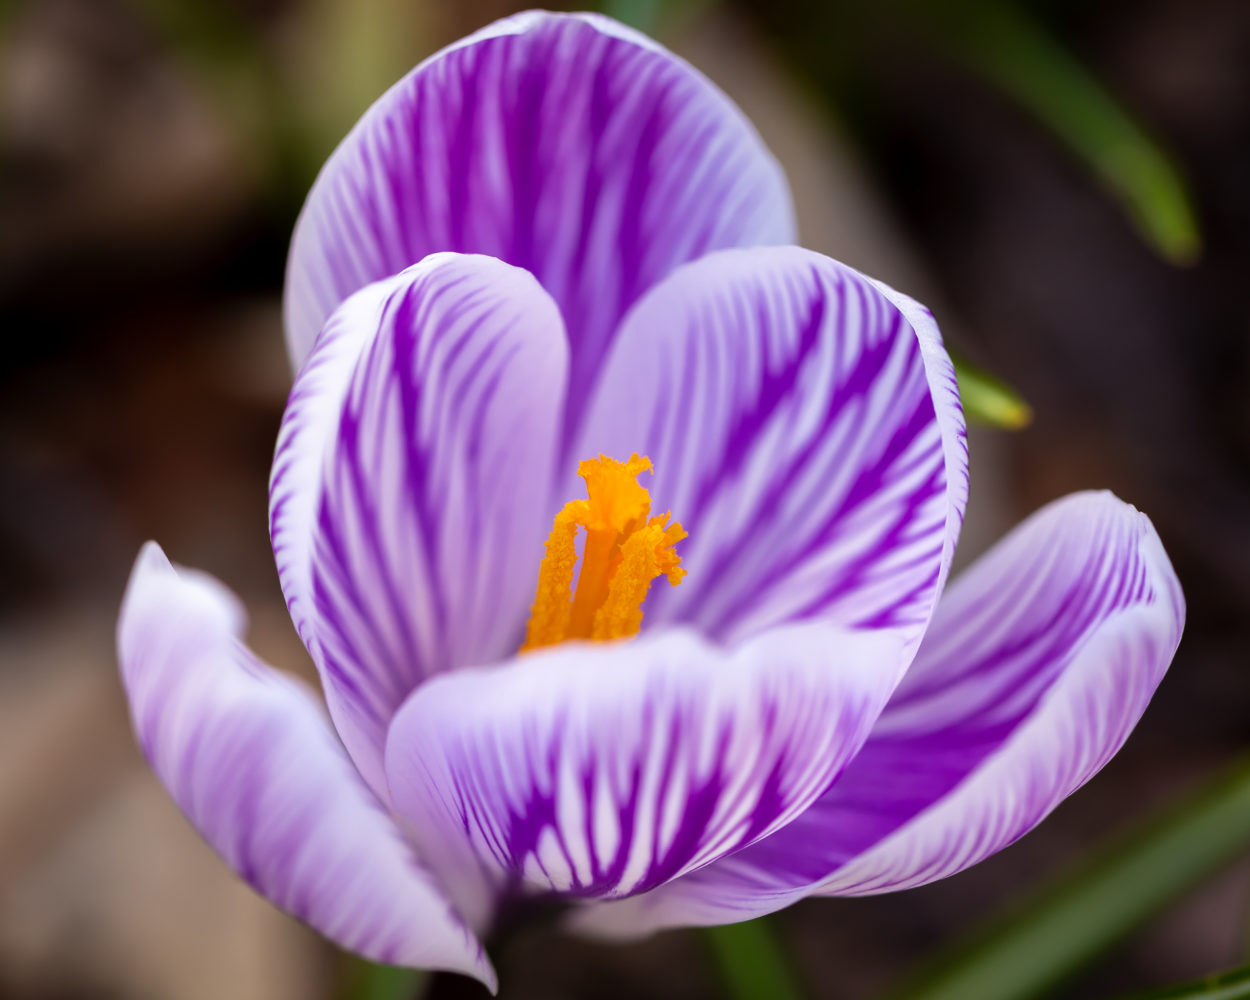 DUTCH CROCUS 'PICKWICK' blooming with purple and white stripes. Image by Tom Hennessy